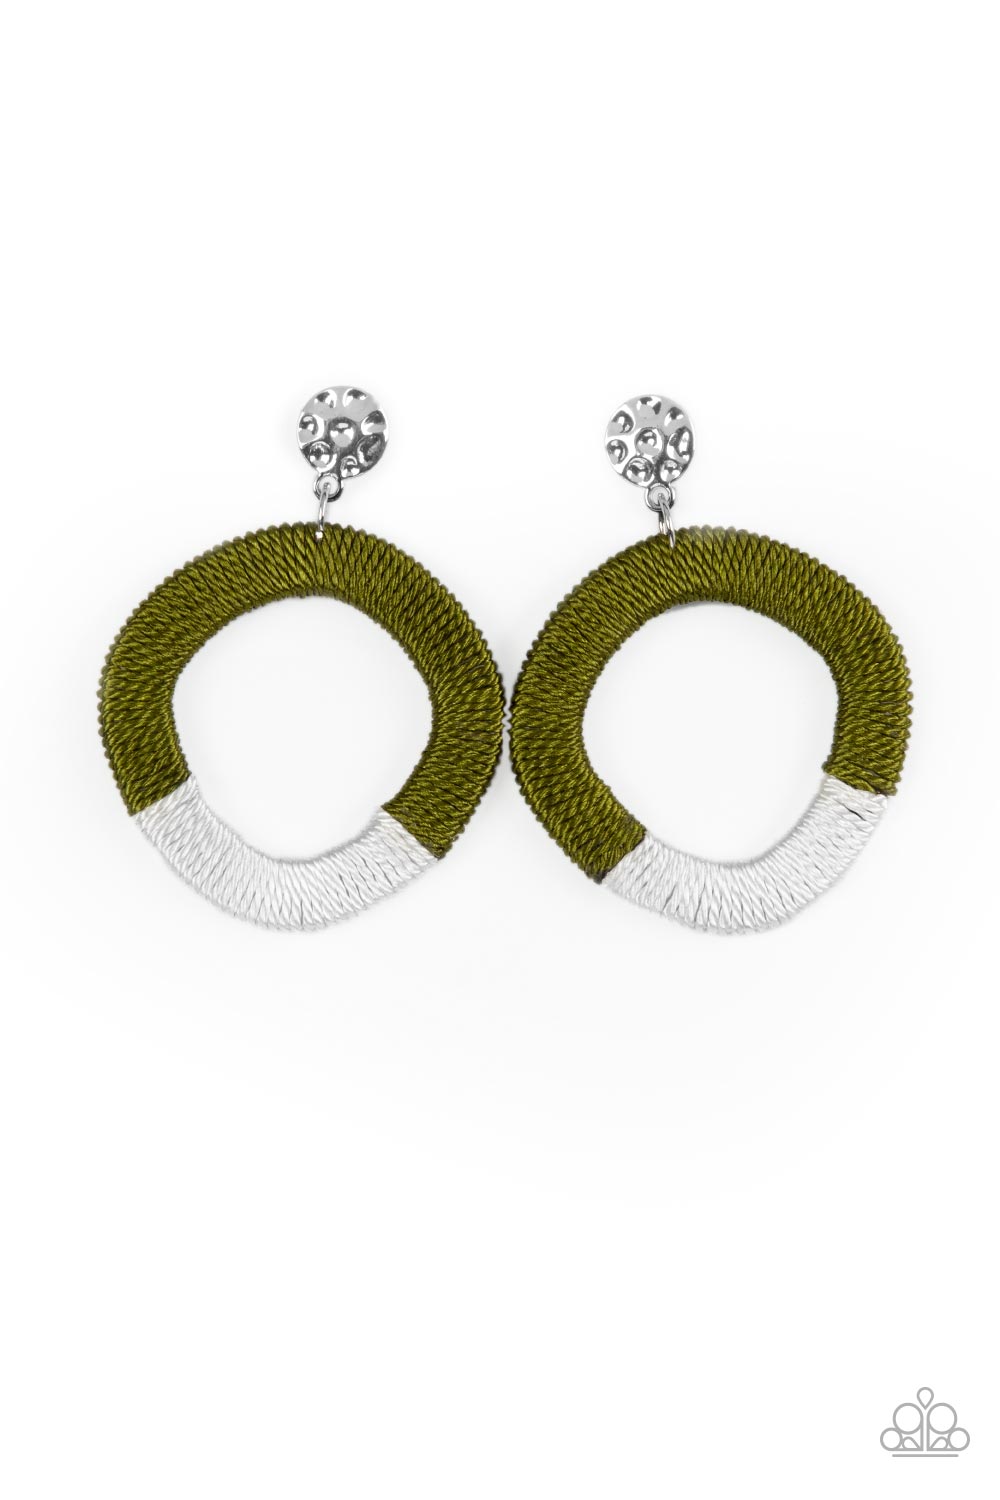 A hammered silver disc gives way to a wooden frame decoratively wrapped in shiny white and Olive Branch threaded accents, creating a colorful lure. Earring attaches to a standard post fitting.